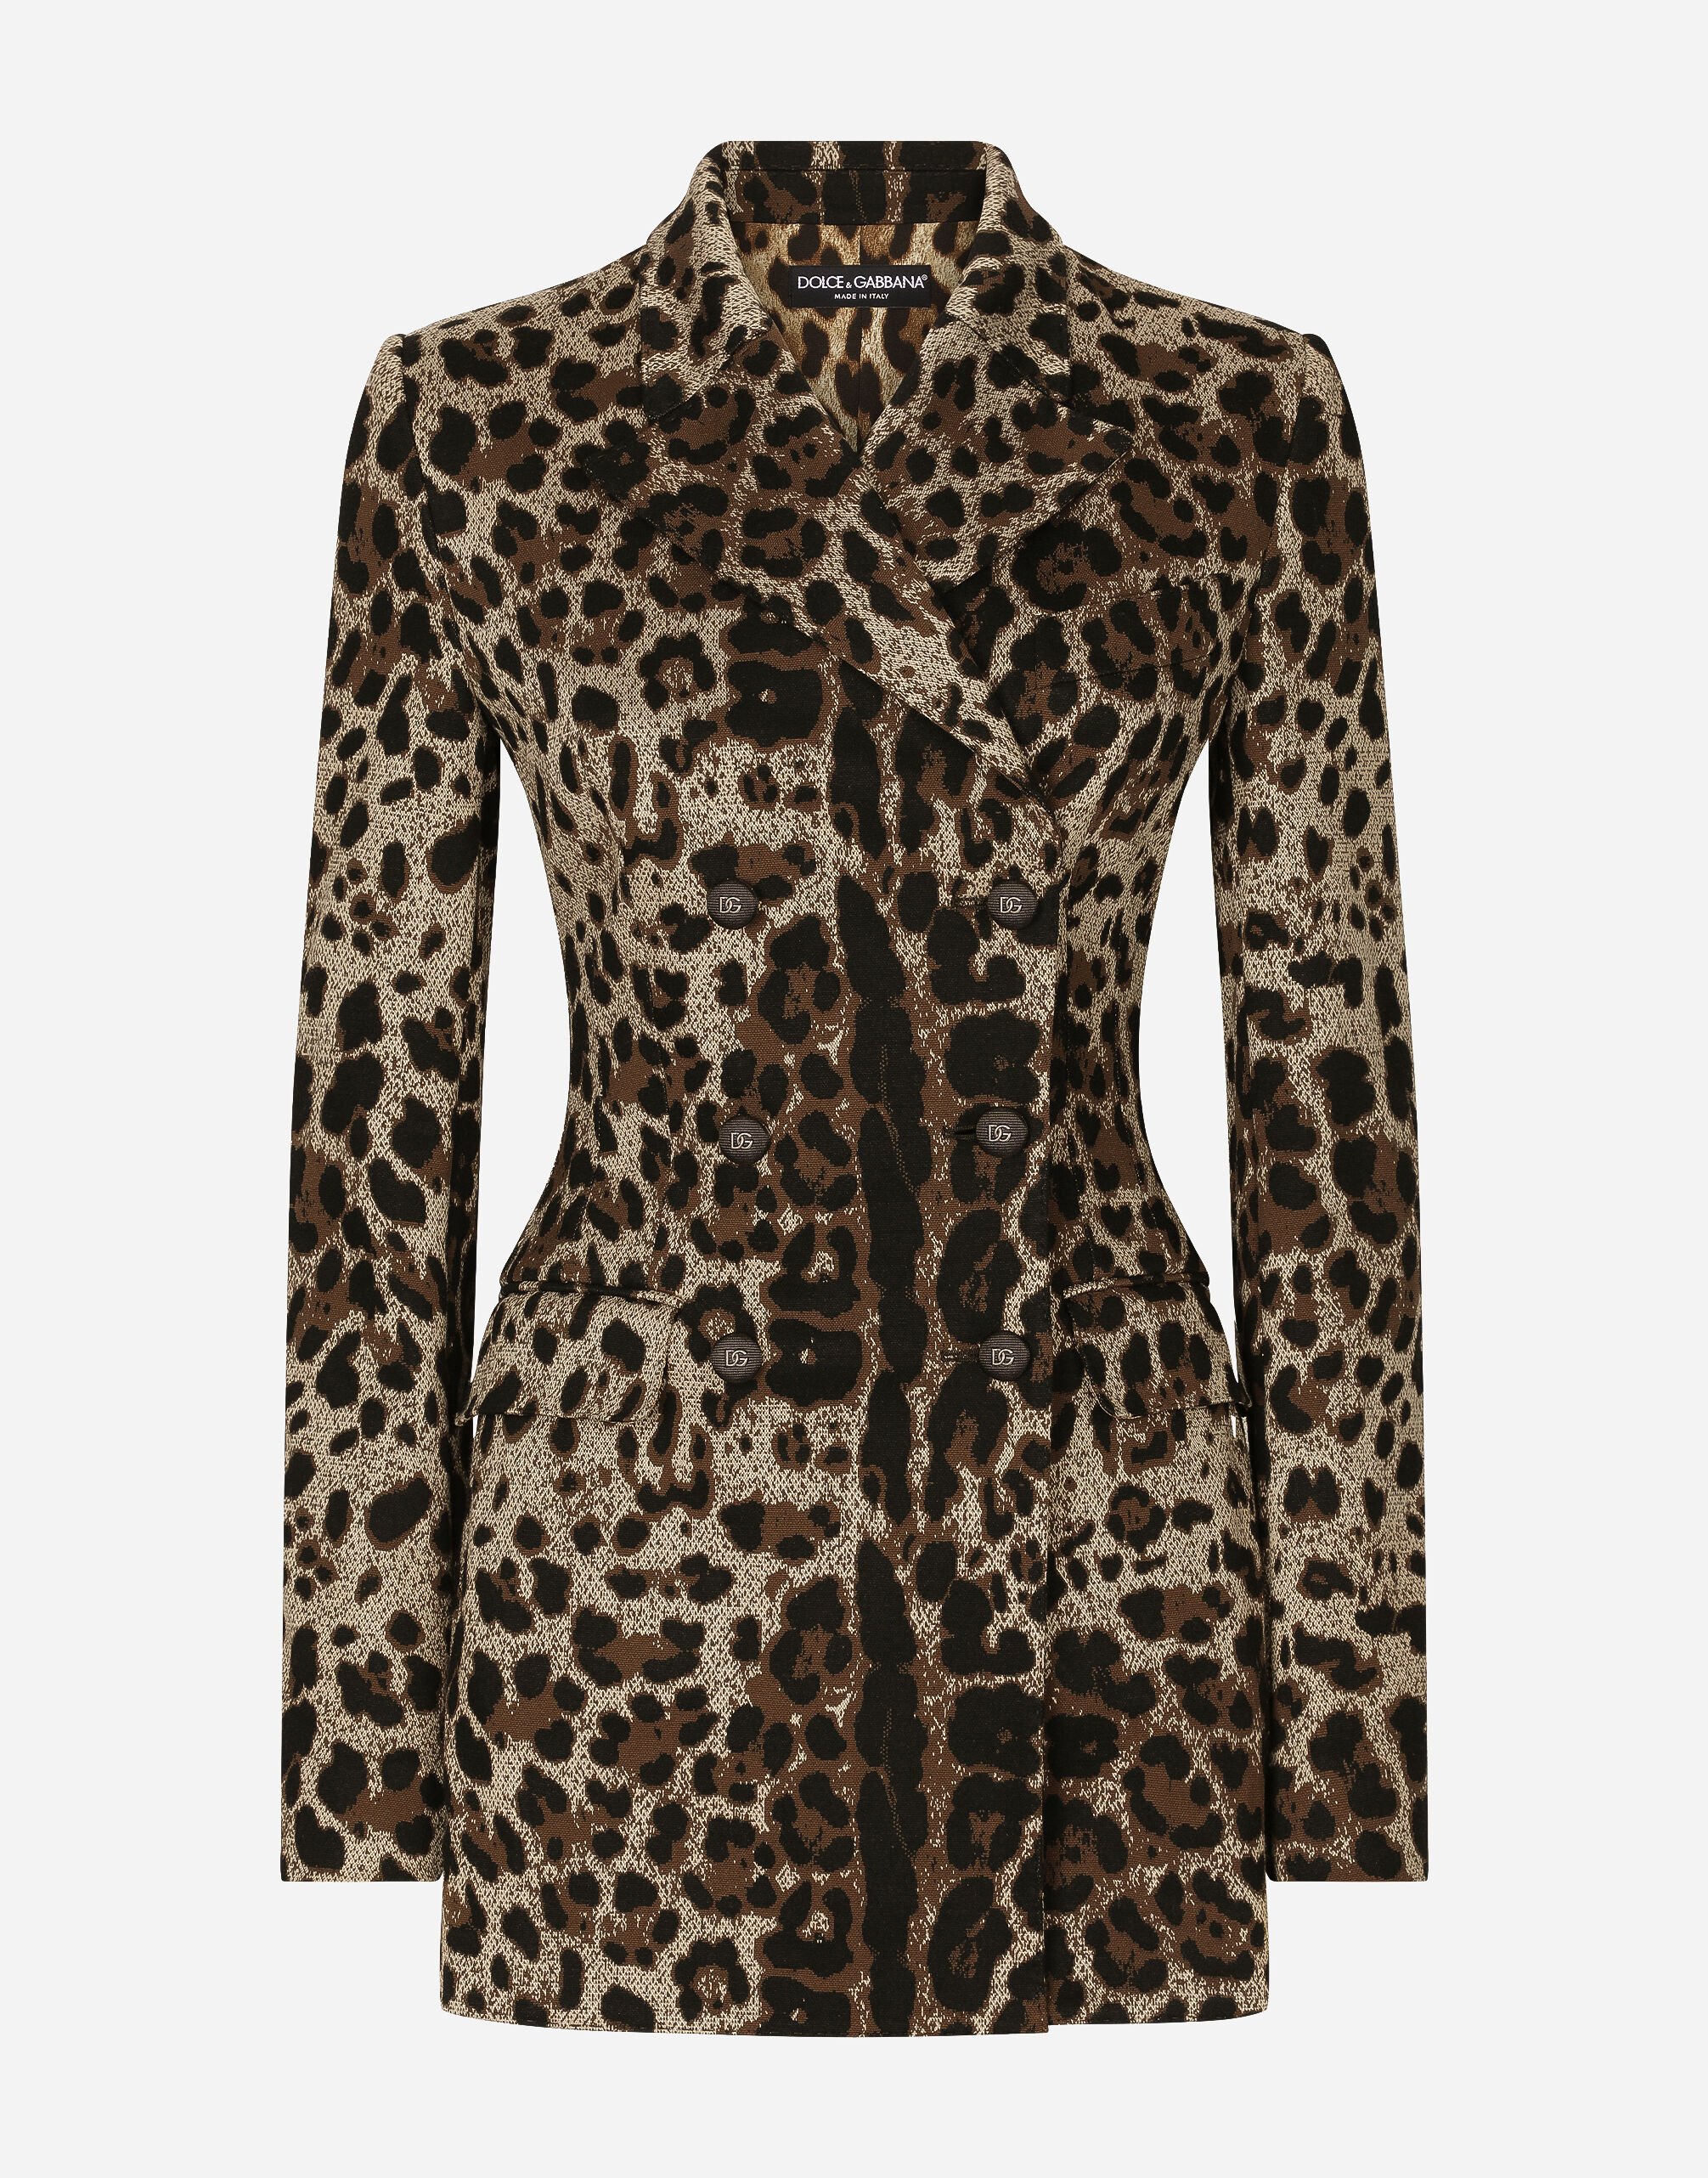 Dolce&Gabbana Double-breasted wool Turlington jacket with jacquard leopard design Animal Print F9R11THSMW8